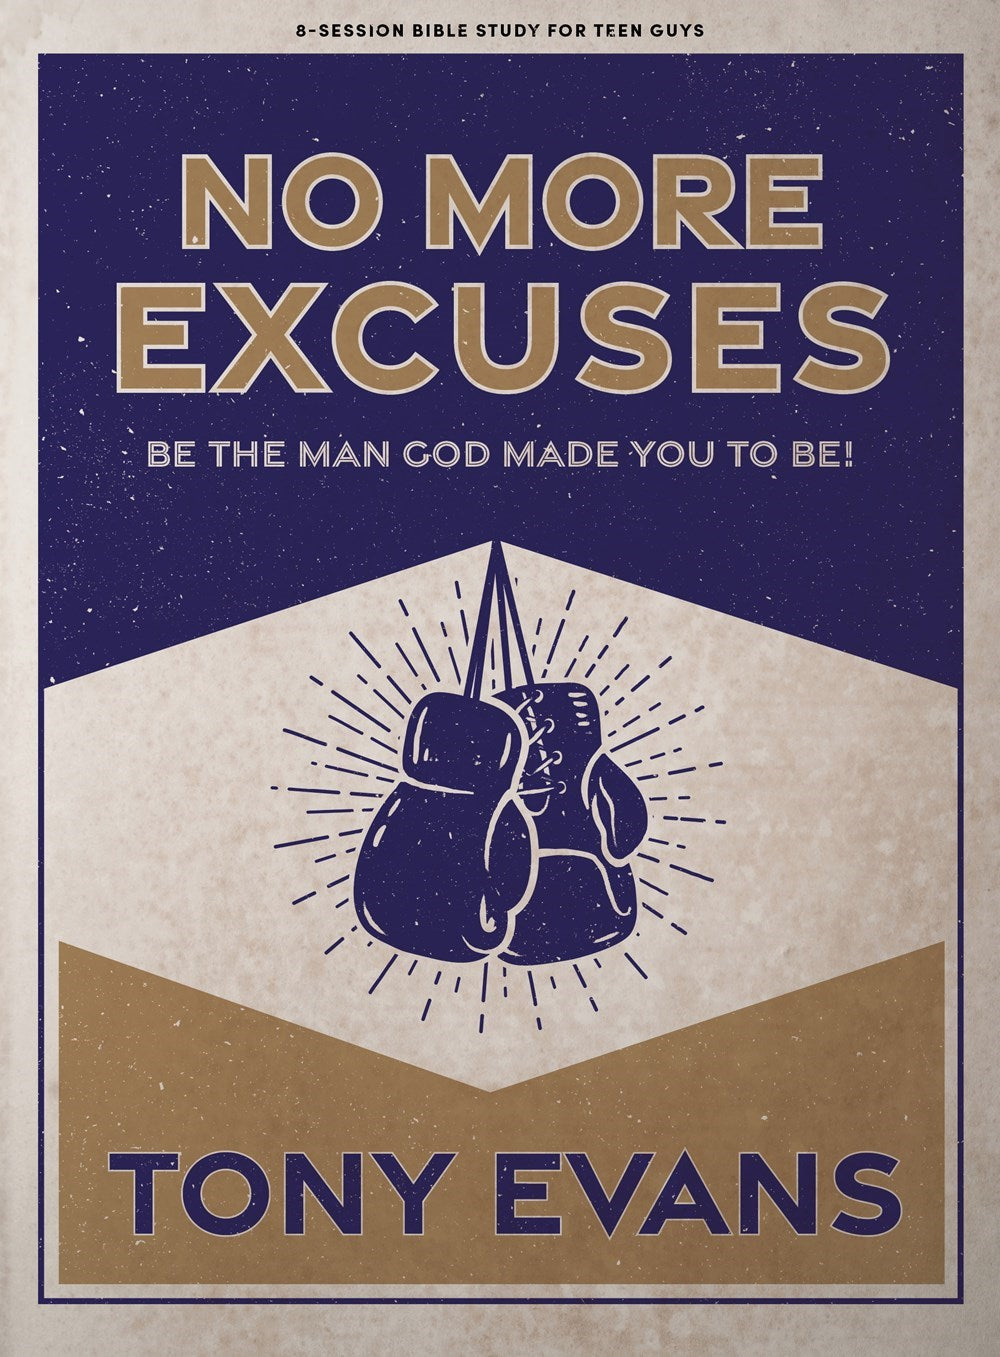 Seed of Abraham Christian Bookstore - (In)Courage - No More Excuses Teen Guys&